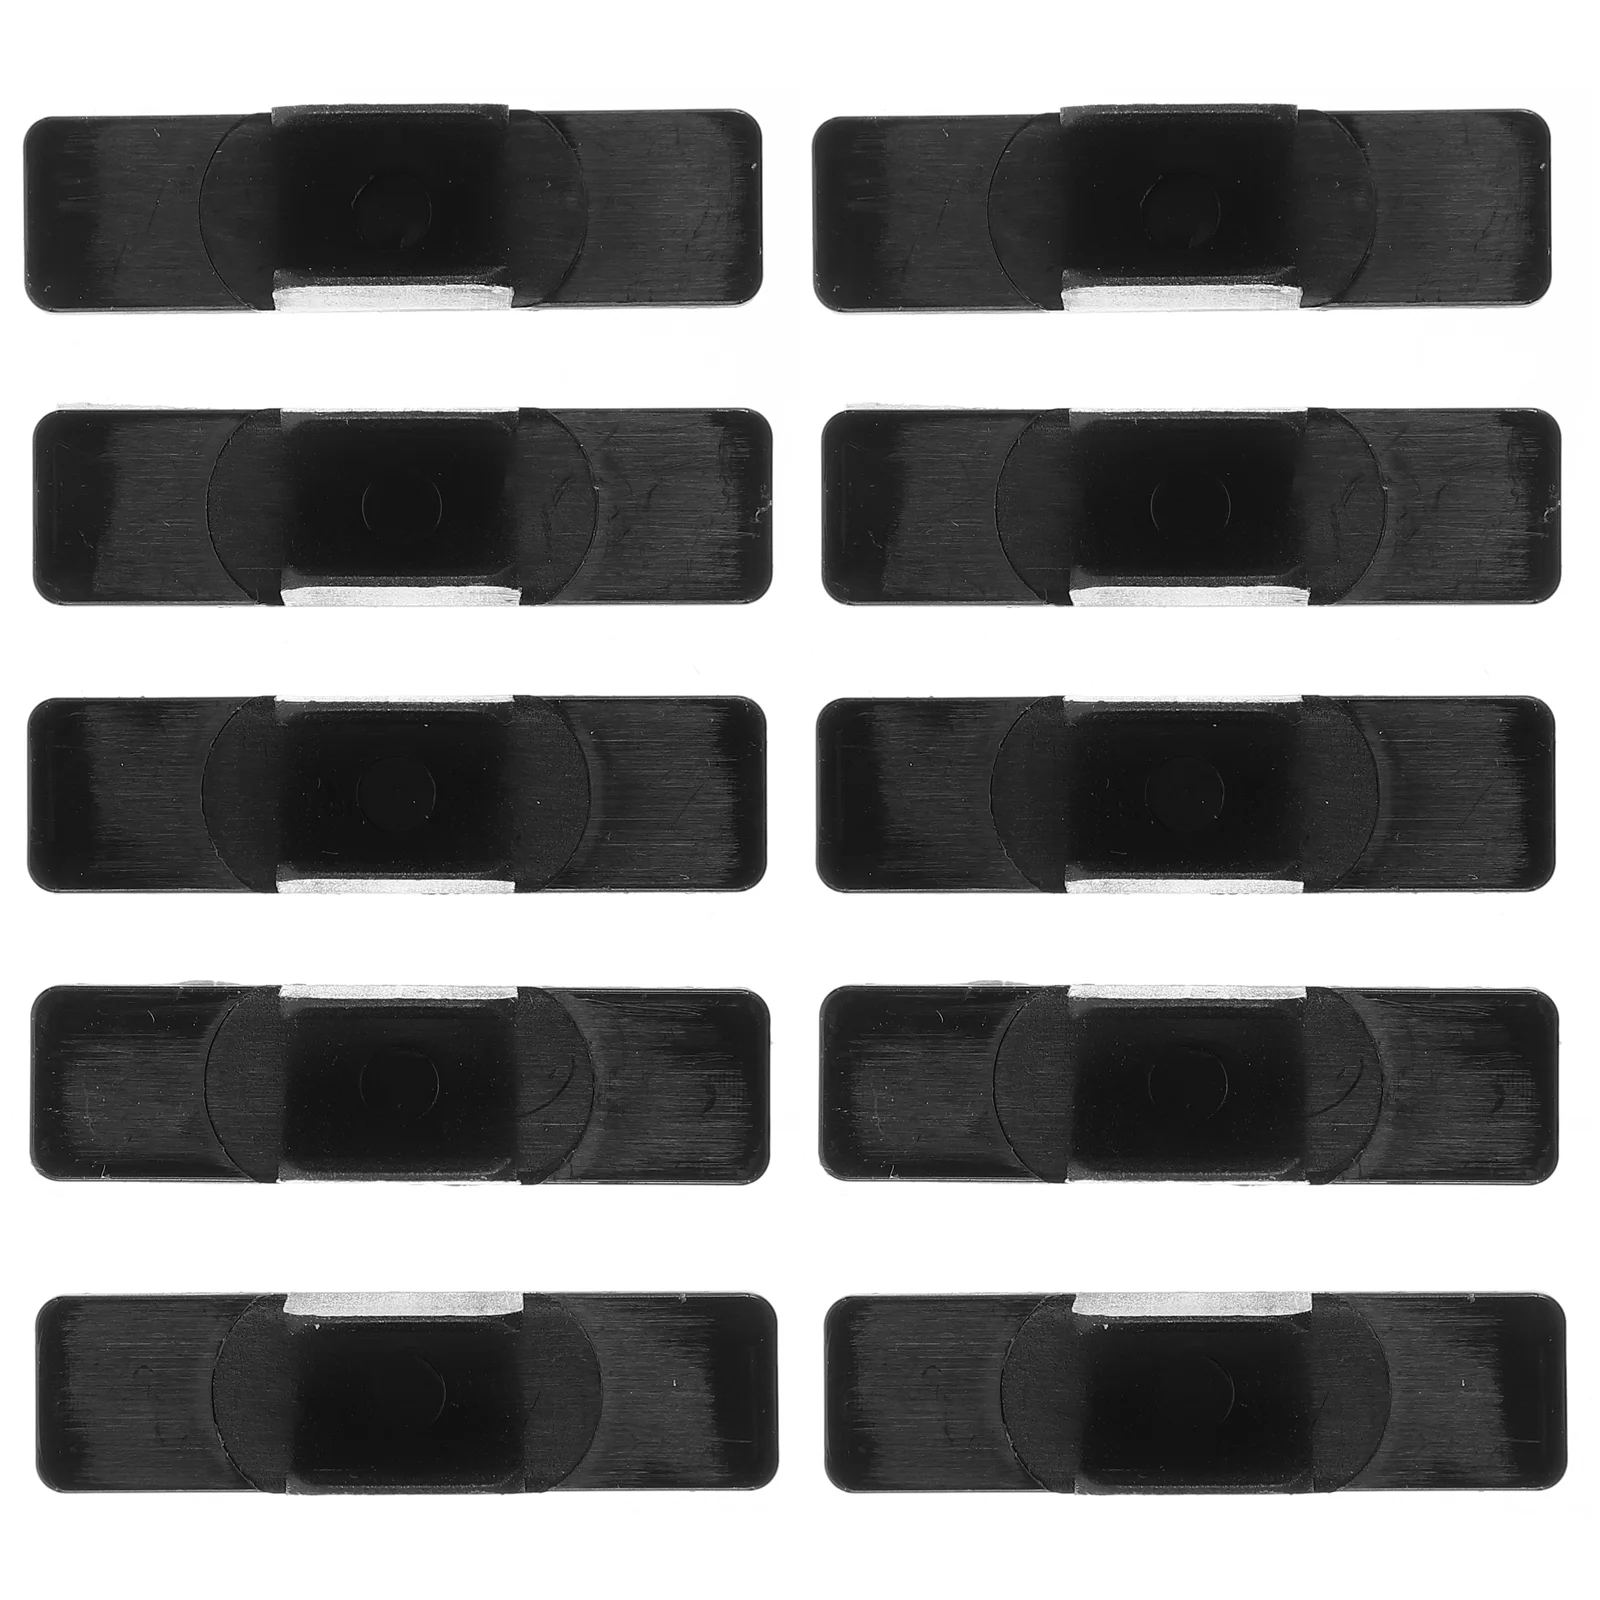 

20pcs Adhesive Pen Clips Whiteboard Pen Buckles Plastic Pen Clamps Whiteboard Markers Fixing Buckles